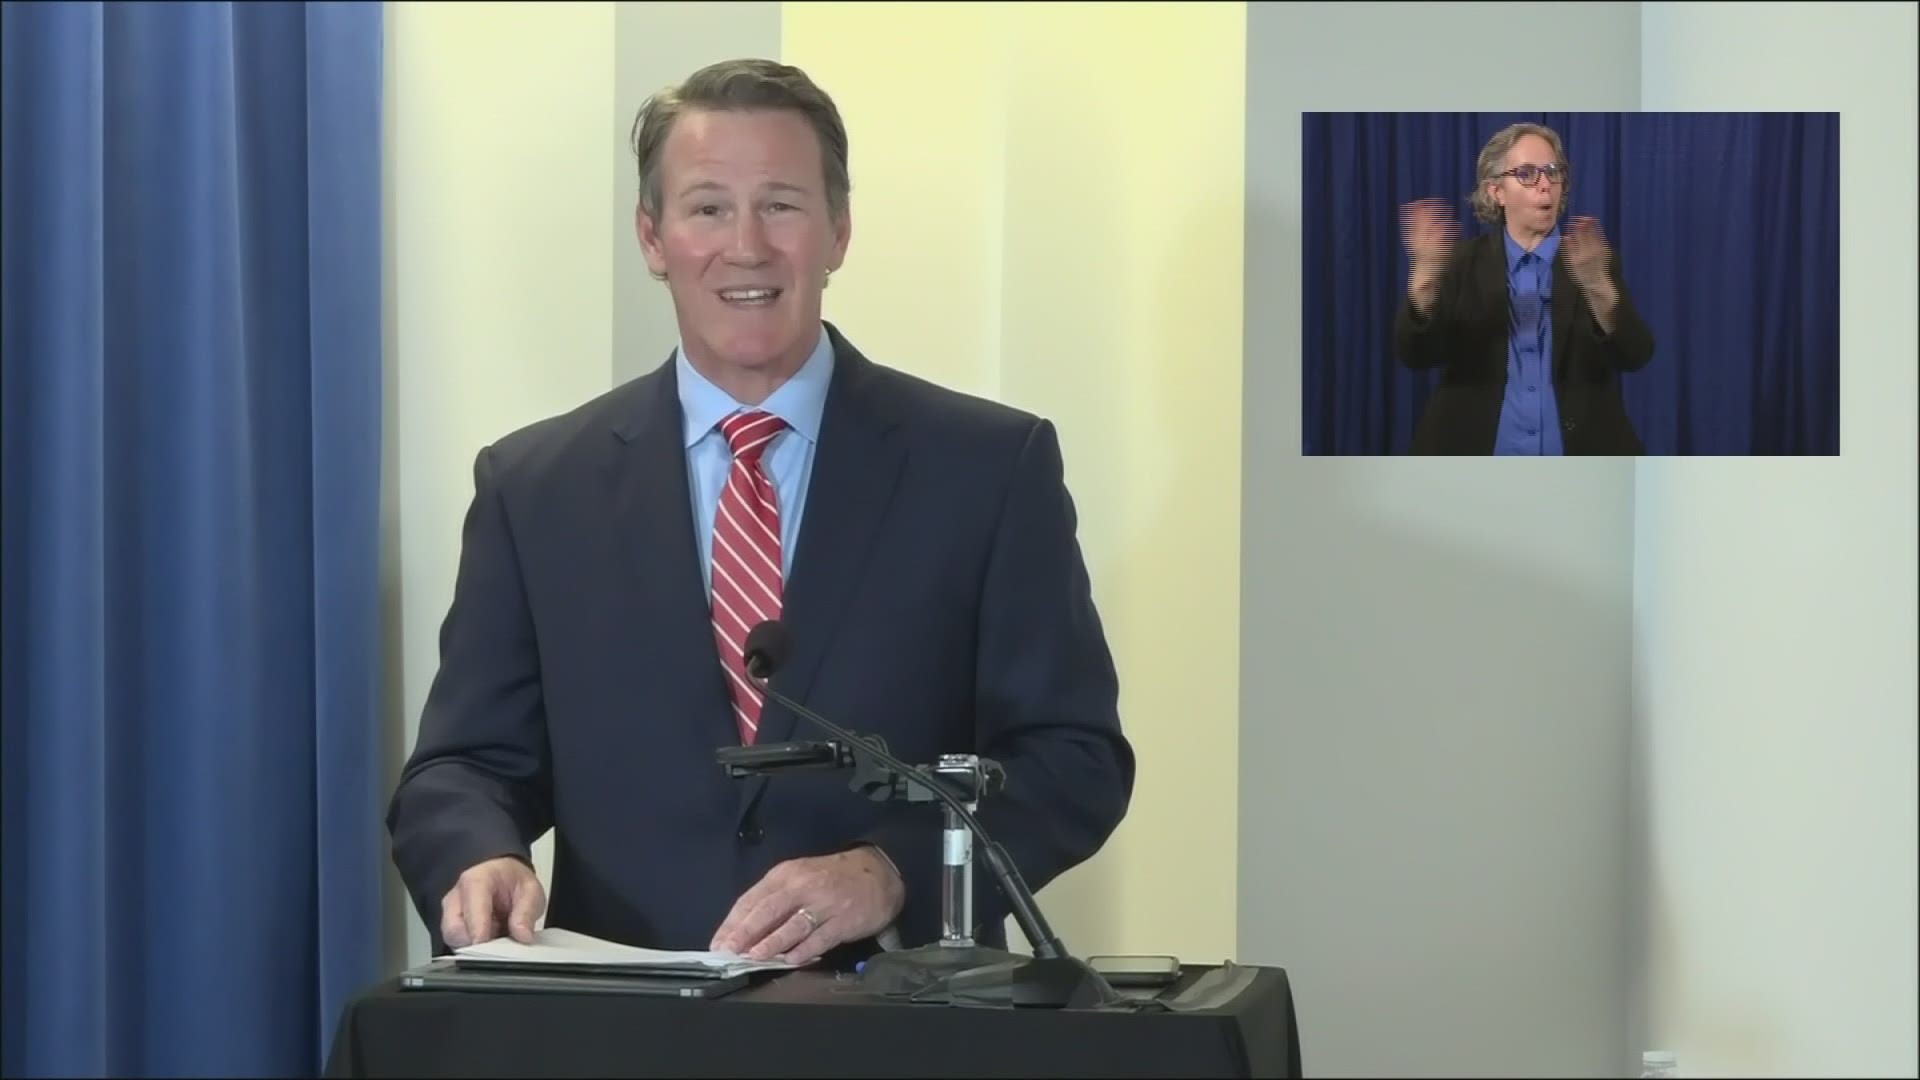 Major announcements in Columbus this afternoon. BMV locations in Ohio will be permitted to reopen on May 26, Lt. Governor Jon Husted announced on Thursday